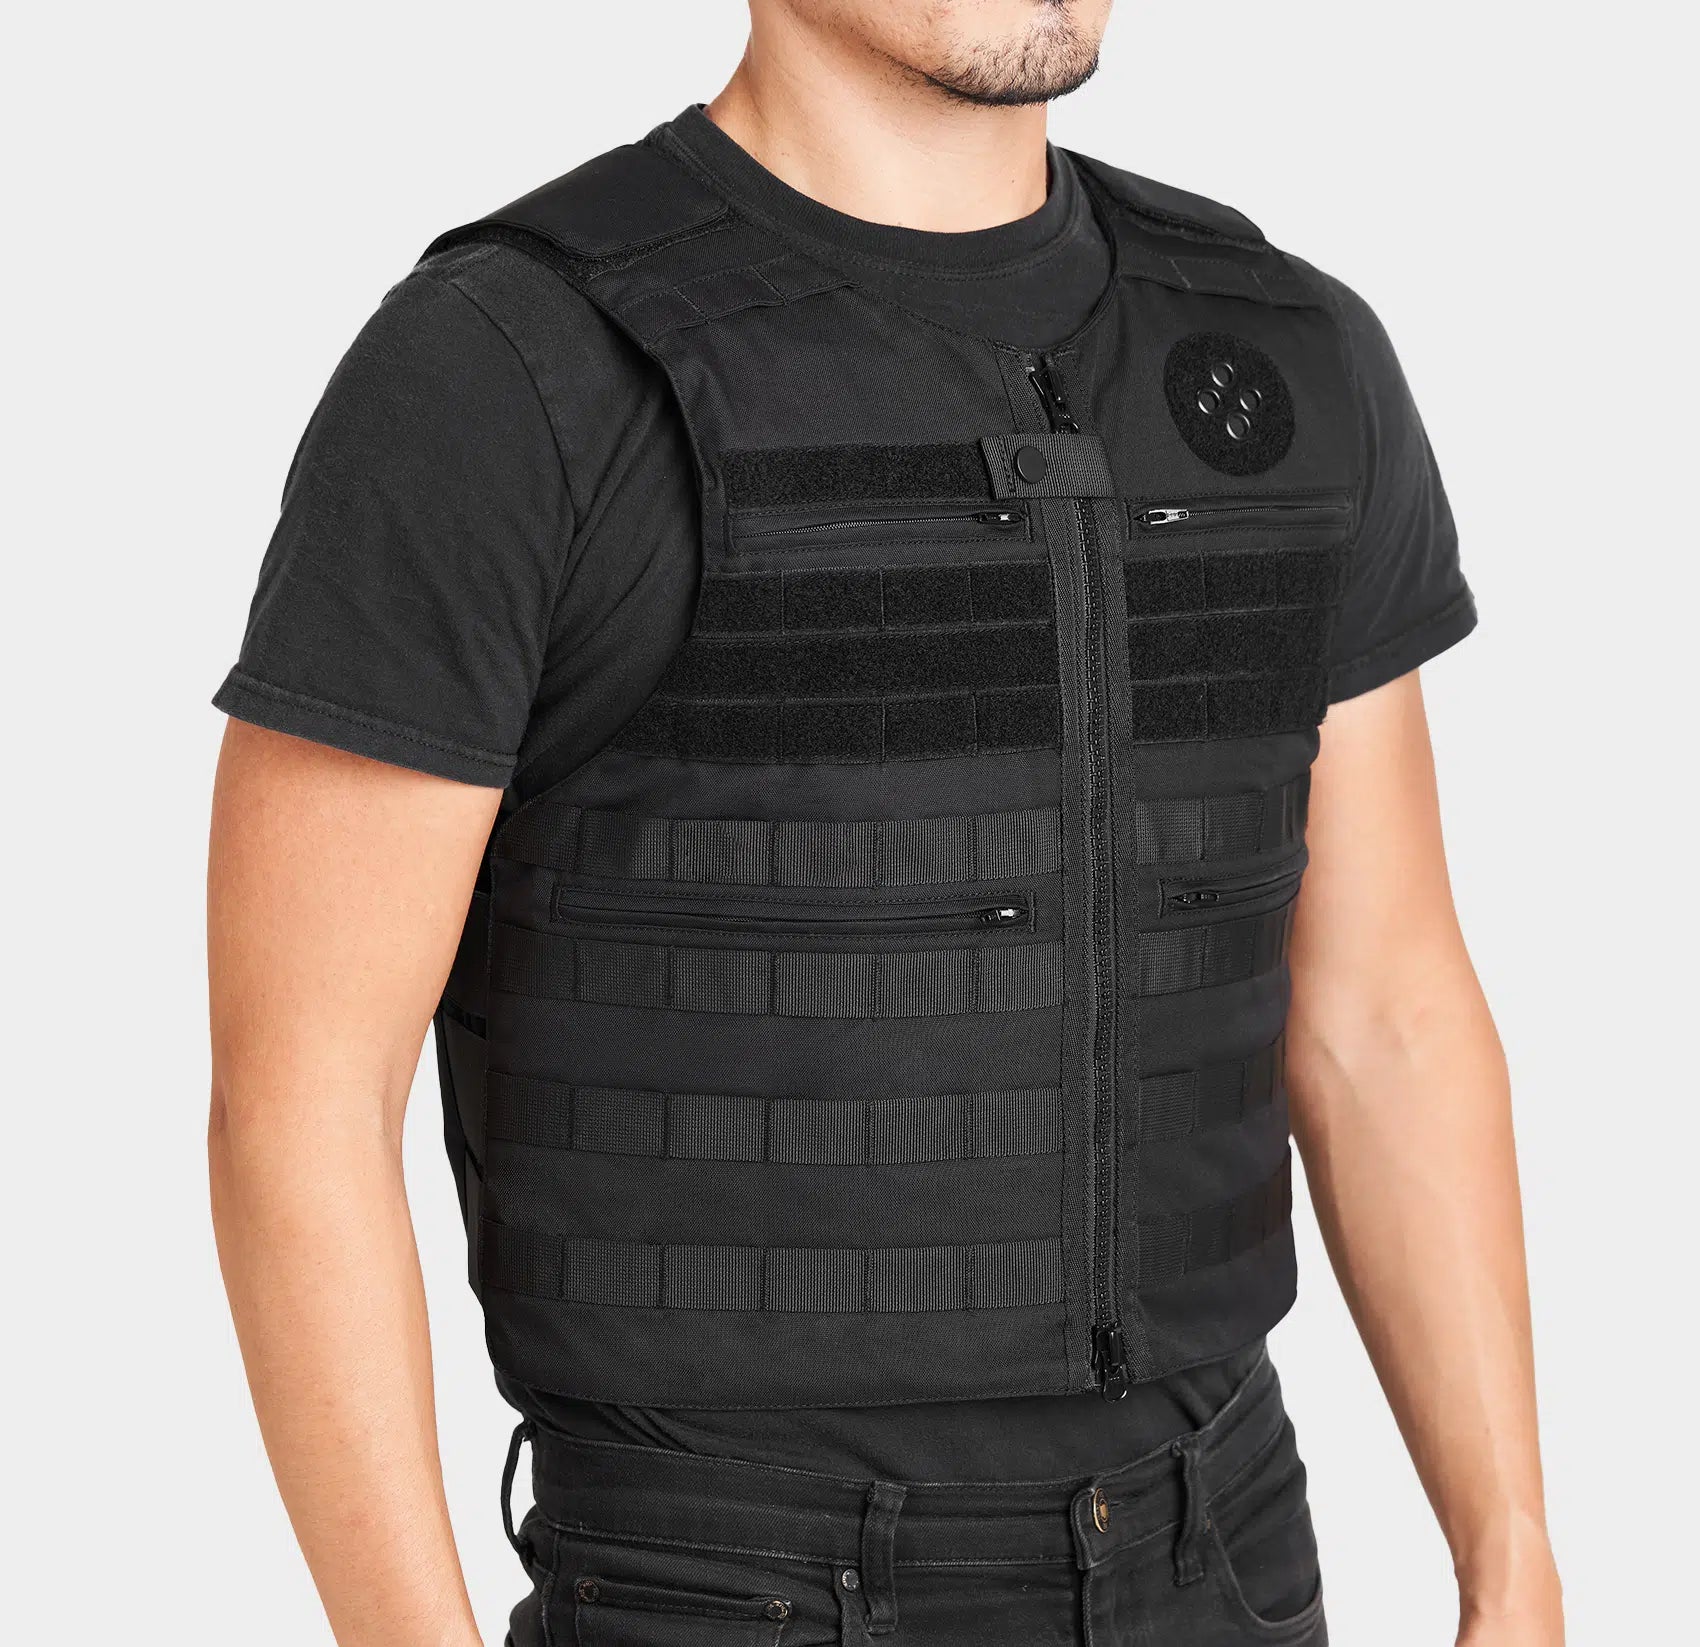 Should You Invest in a Bulletproof Vest? Here's the Top 5 Reasons Why!